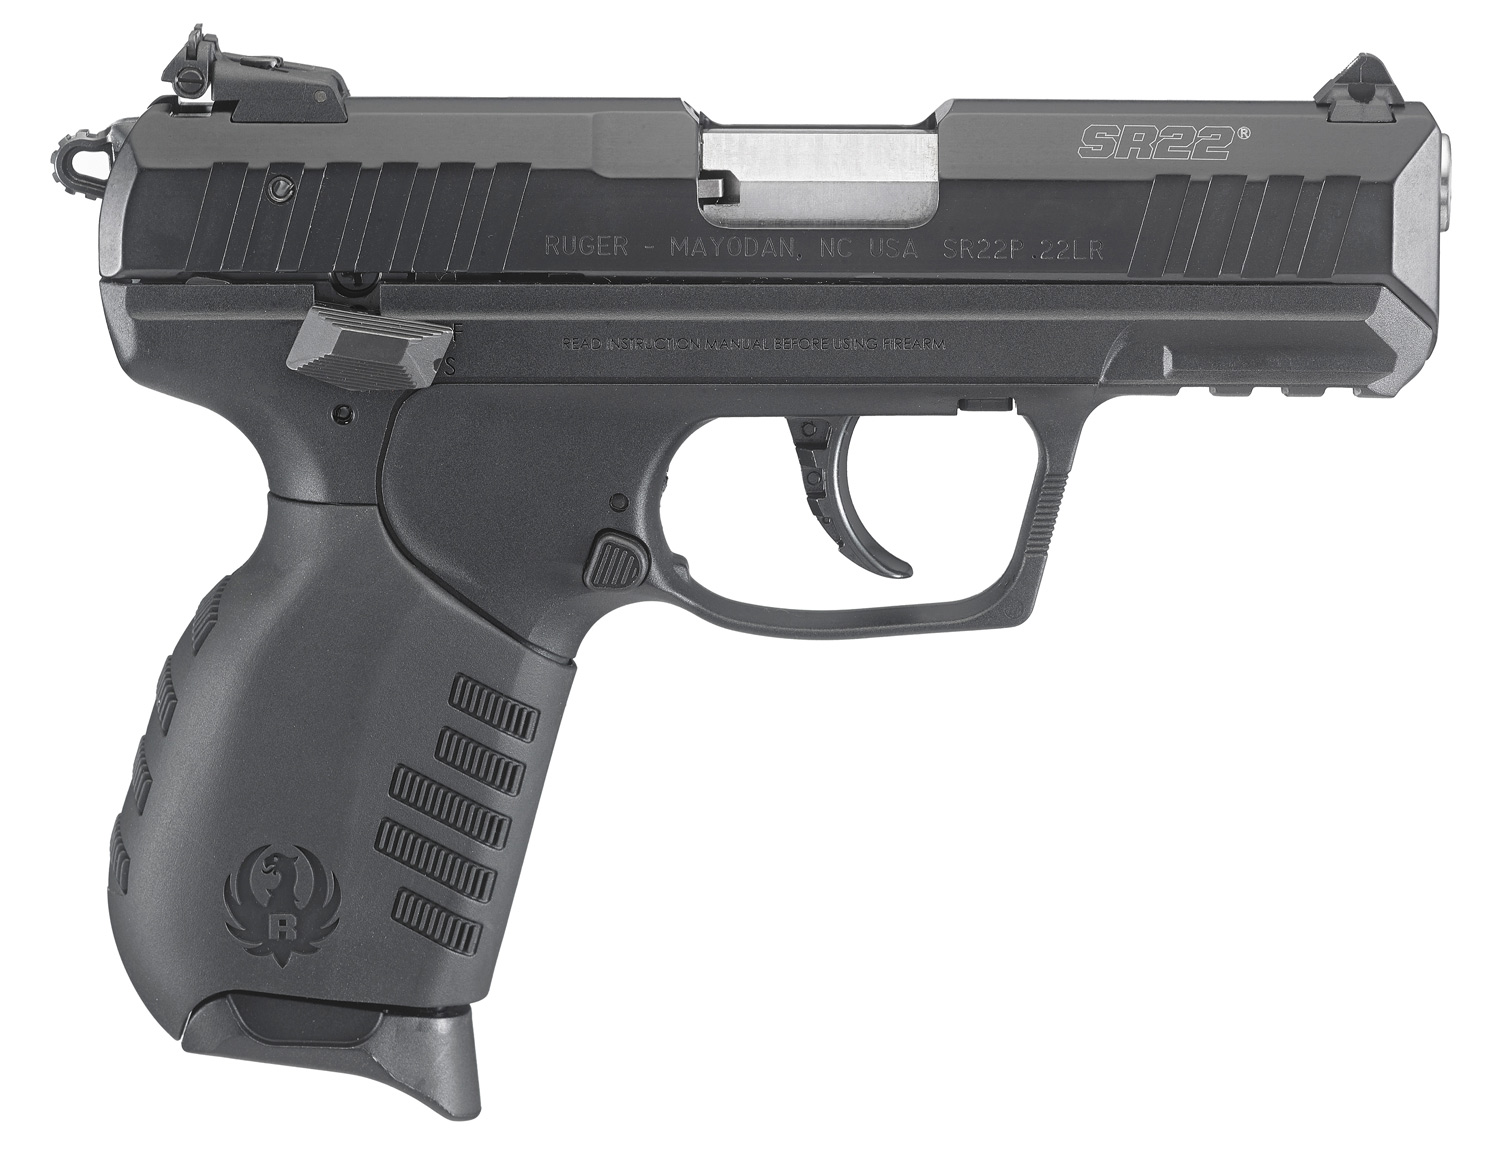 Introducing the California Compliant Ruger SR22: Available at Sports South!